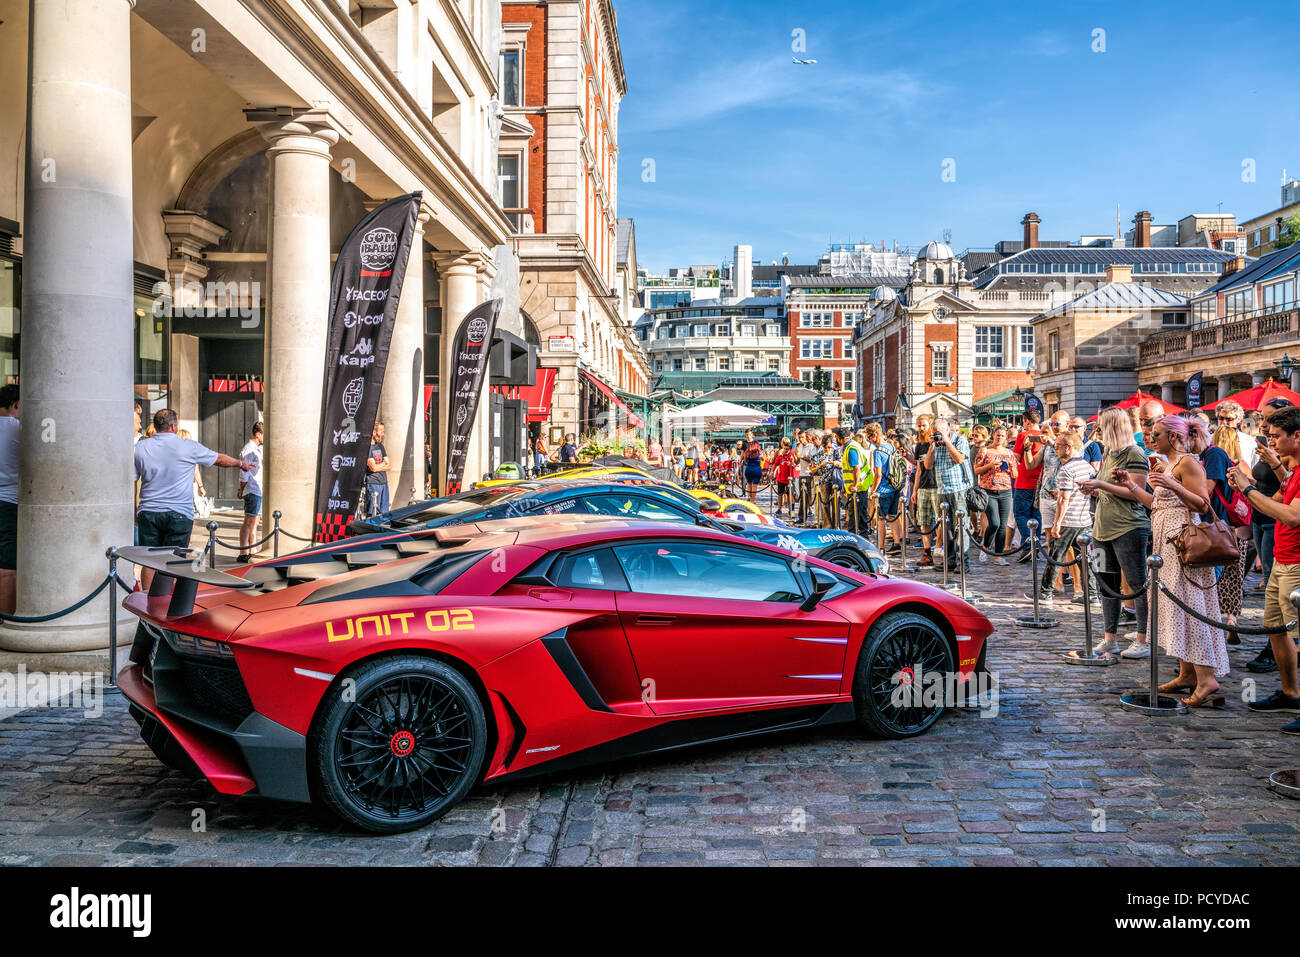 4 Aug 2018 - London, UK. Charity rally event Gumball 3000. Lamborghini Aventador LP750-4 supercar in red displayed at Covent Garden, London. Stock Photo